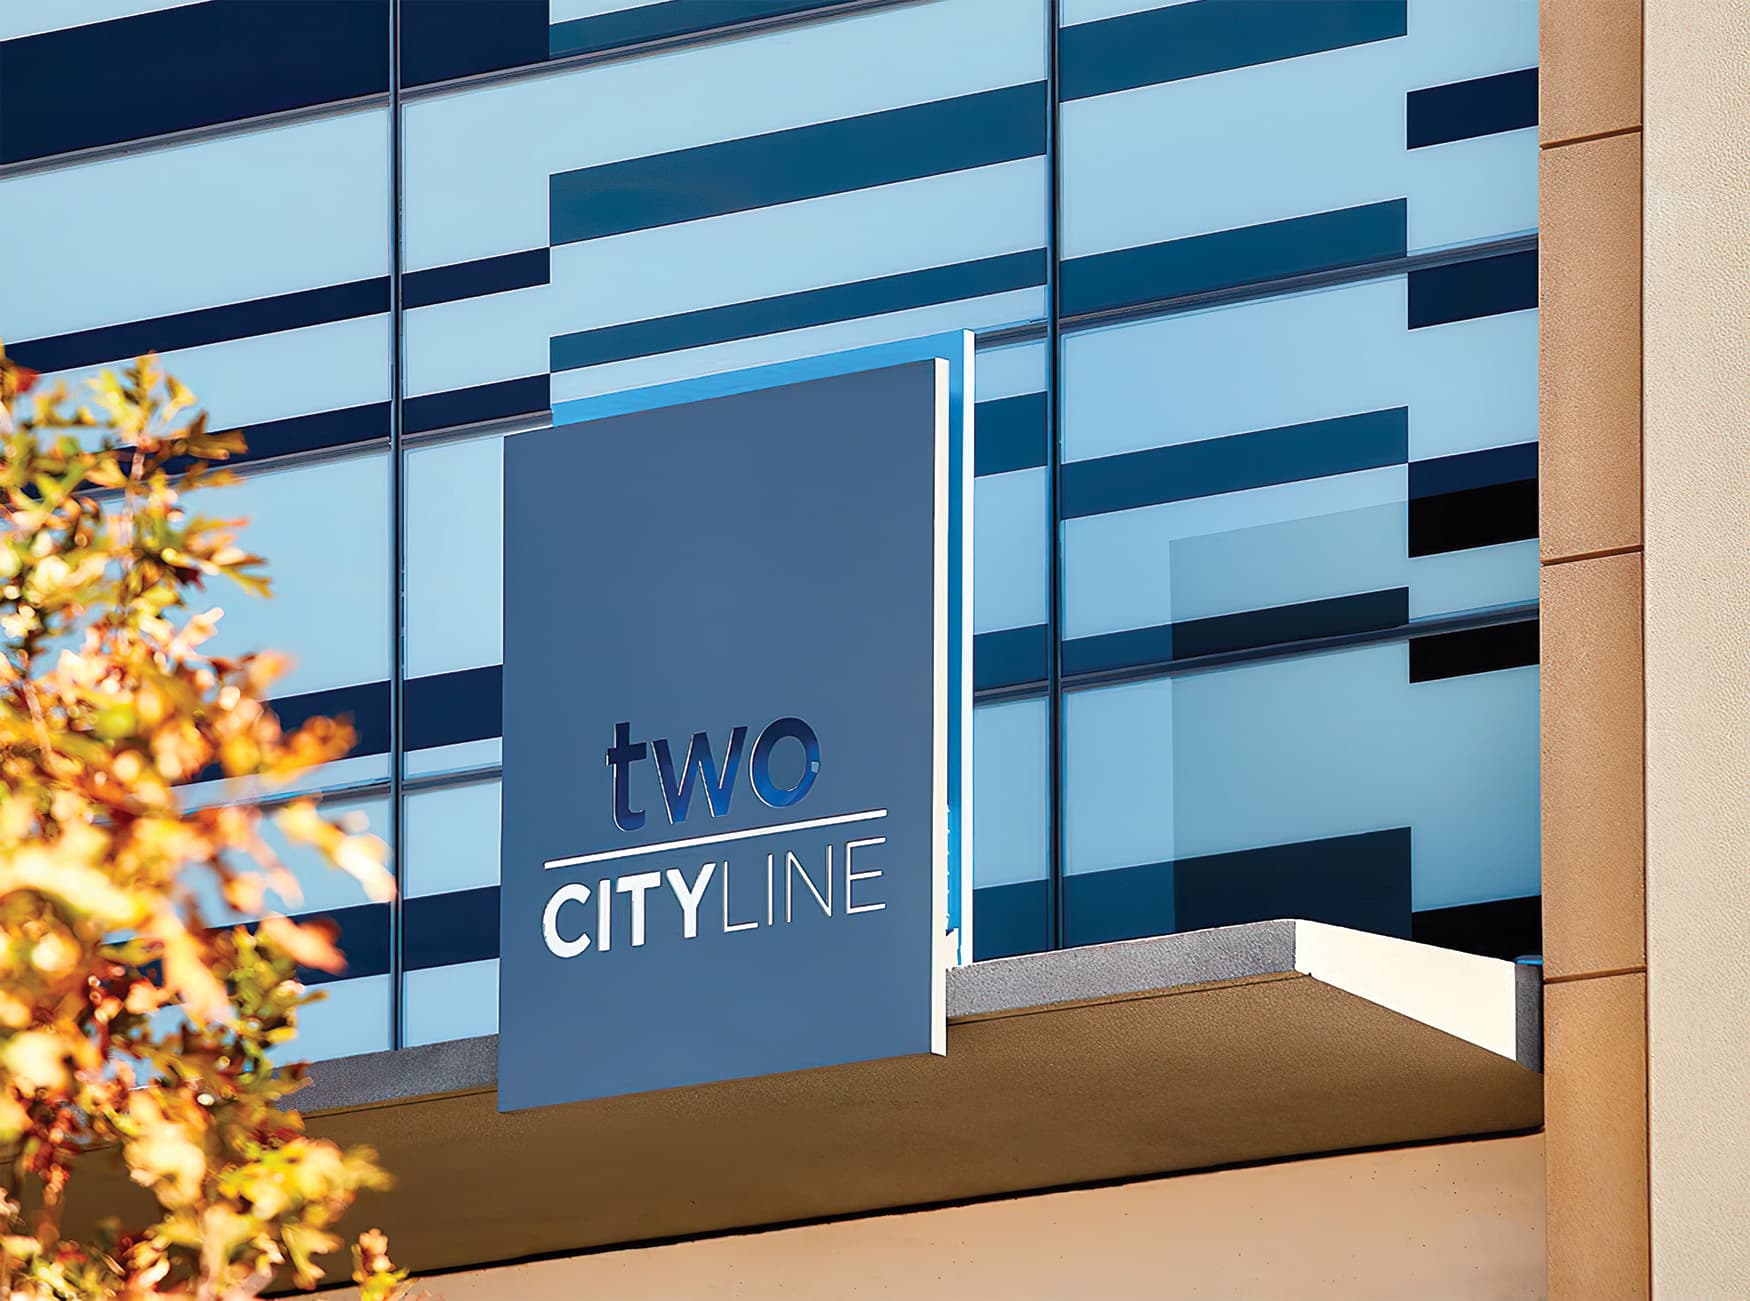 CityLine a mixed-use development in Dallas, Texas. Identity and wayfinding design.